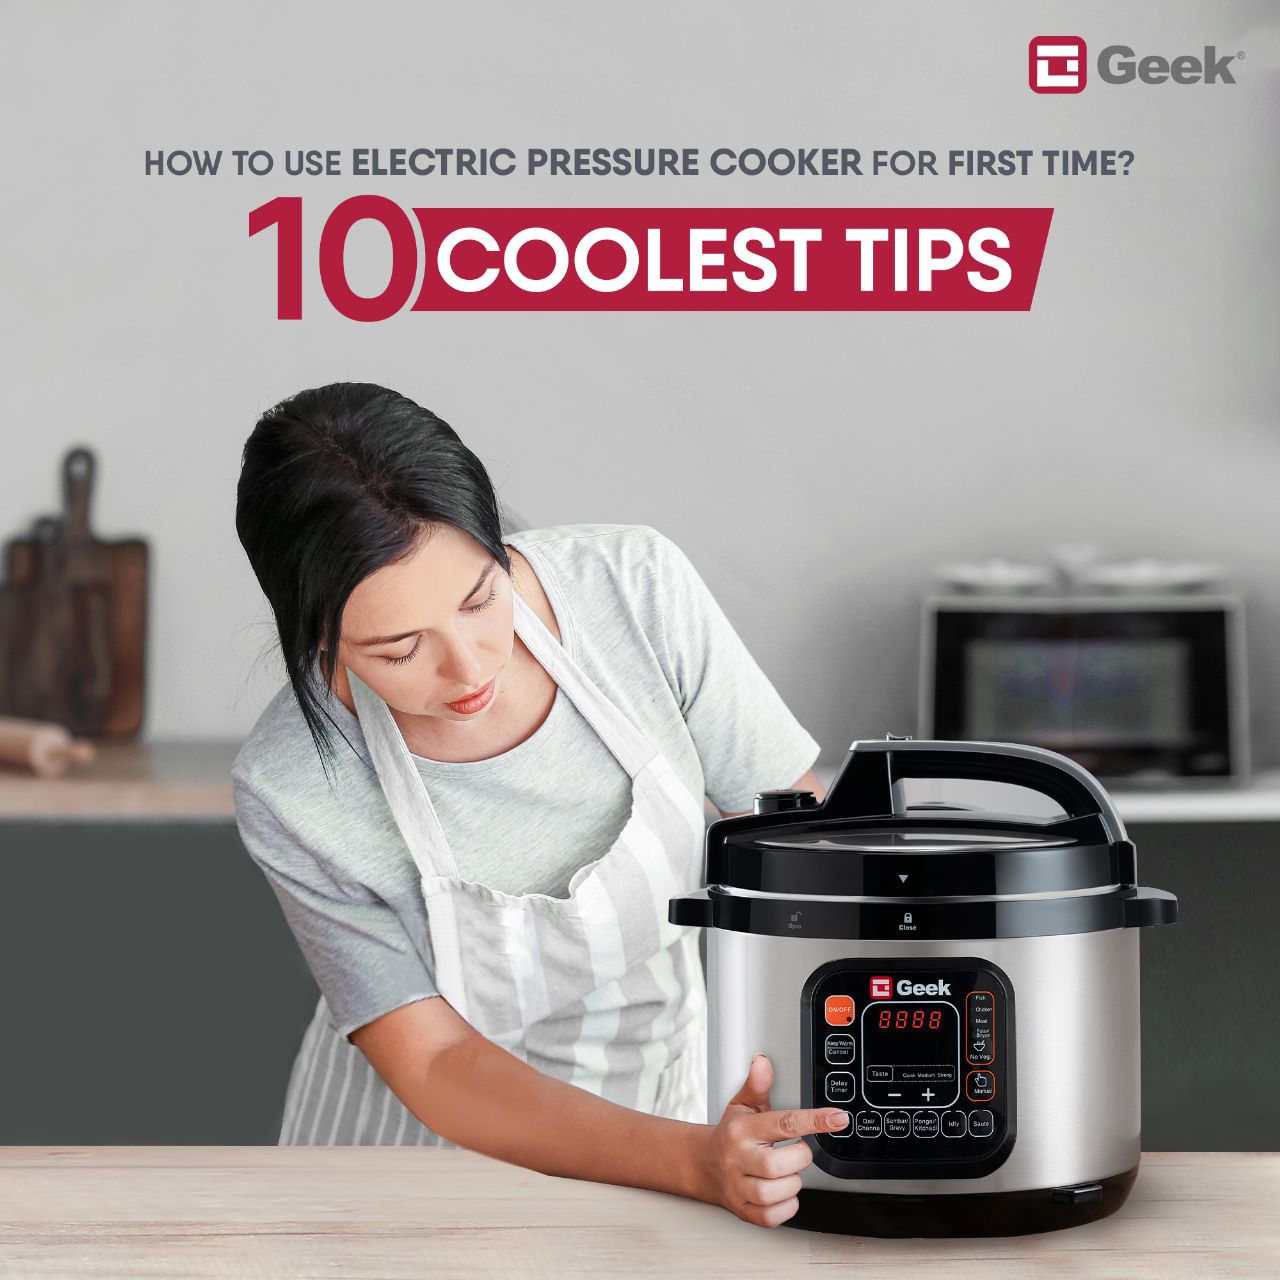 10 Smart Hacks to Get More Out of Your Electric Pressure Cooker Every Day